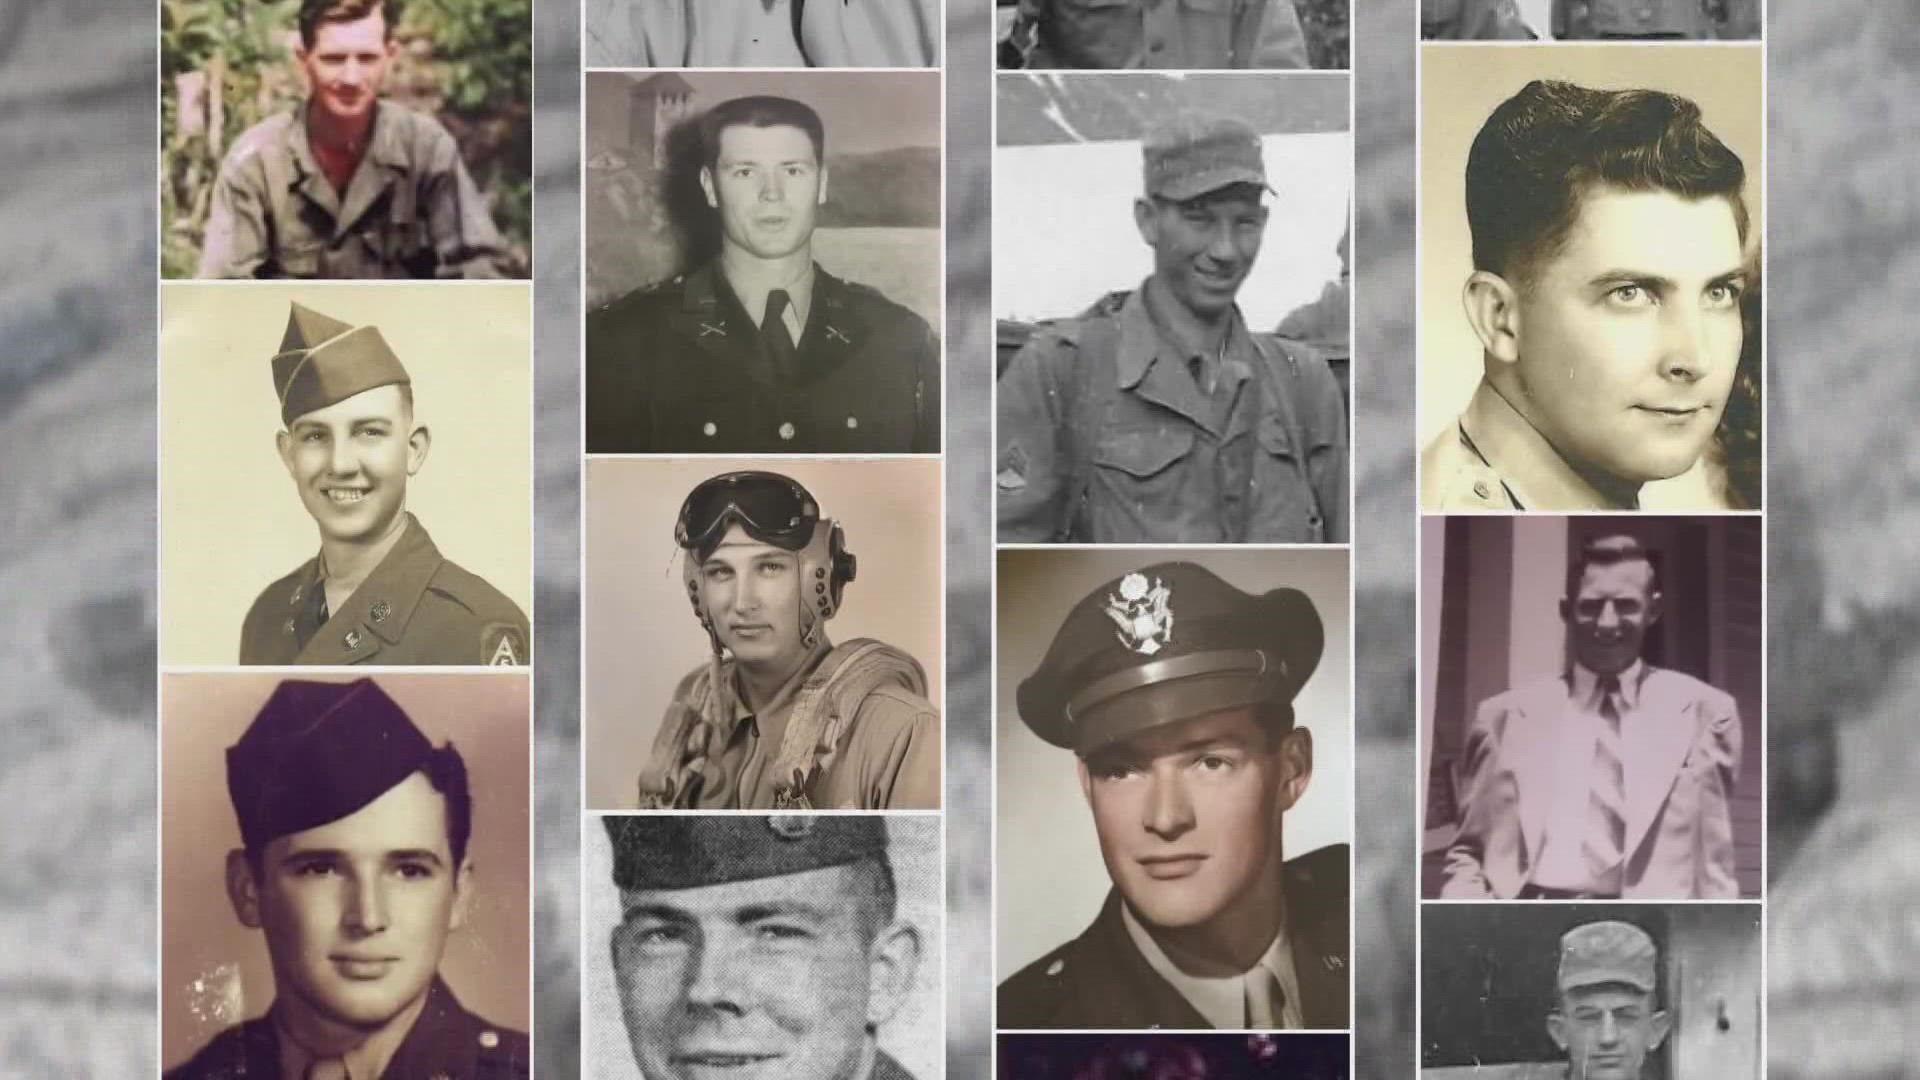 An amendment was debated and passed on the floor of the U.S. House of Representatives to recover the remains of 2 local servicemen killed in 1952.